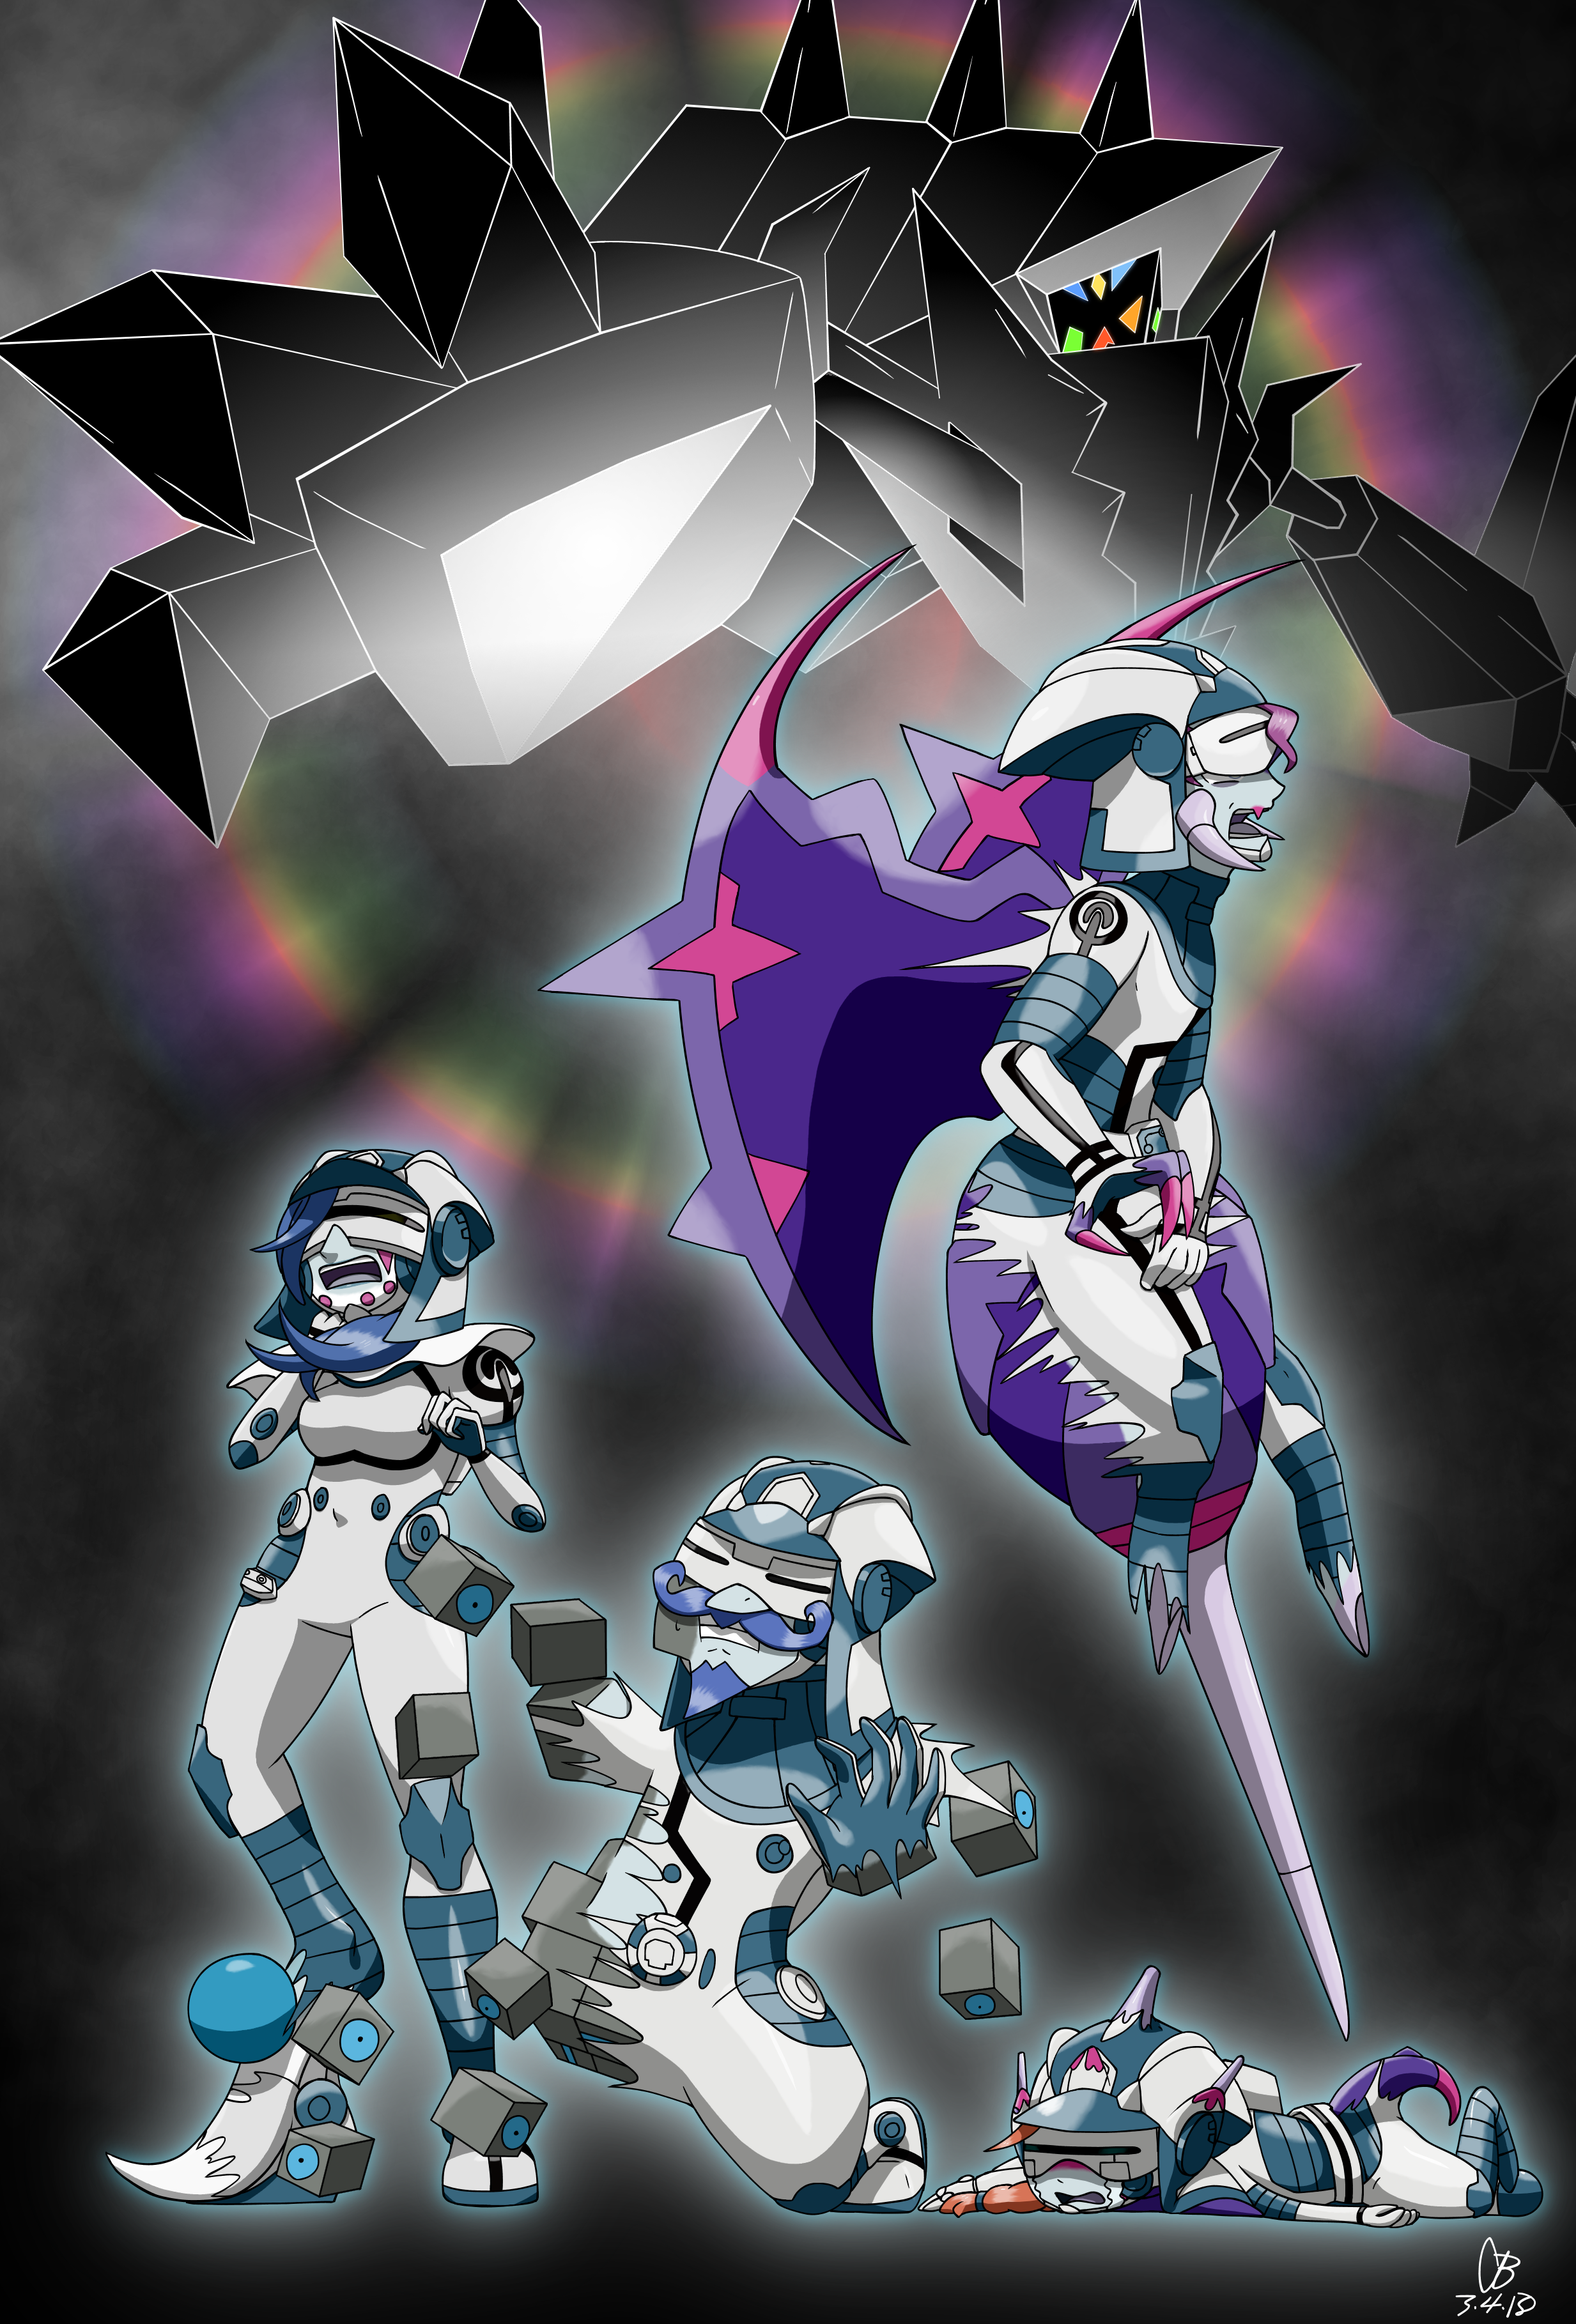 Ultra Beasts Pokemon by coolhwhip1999 on DeviantArt